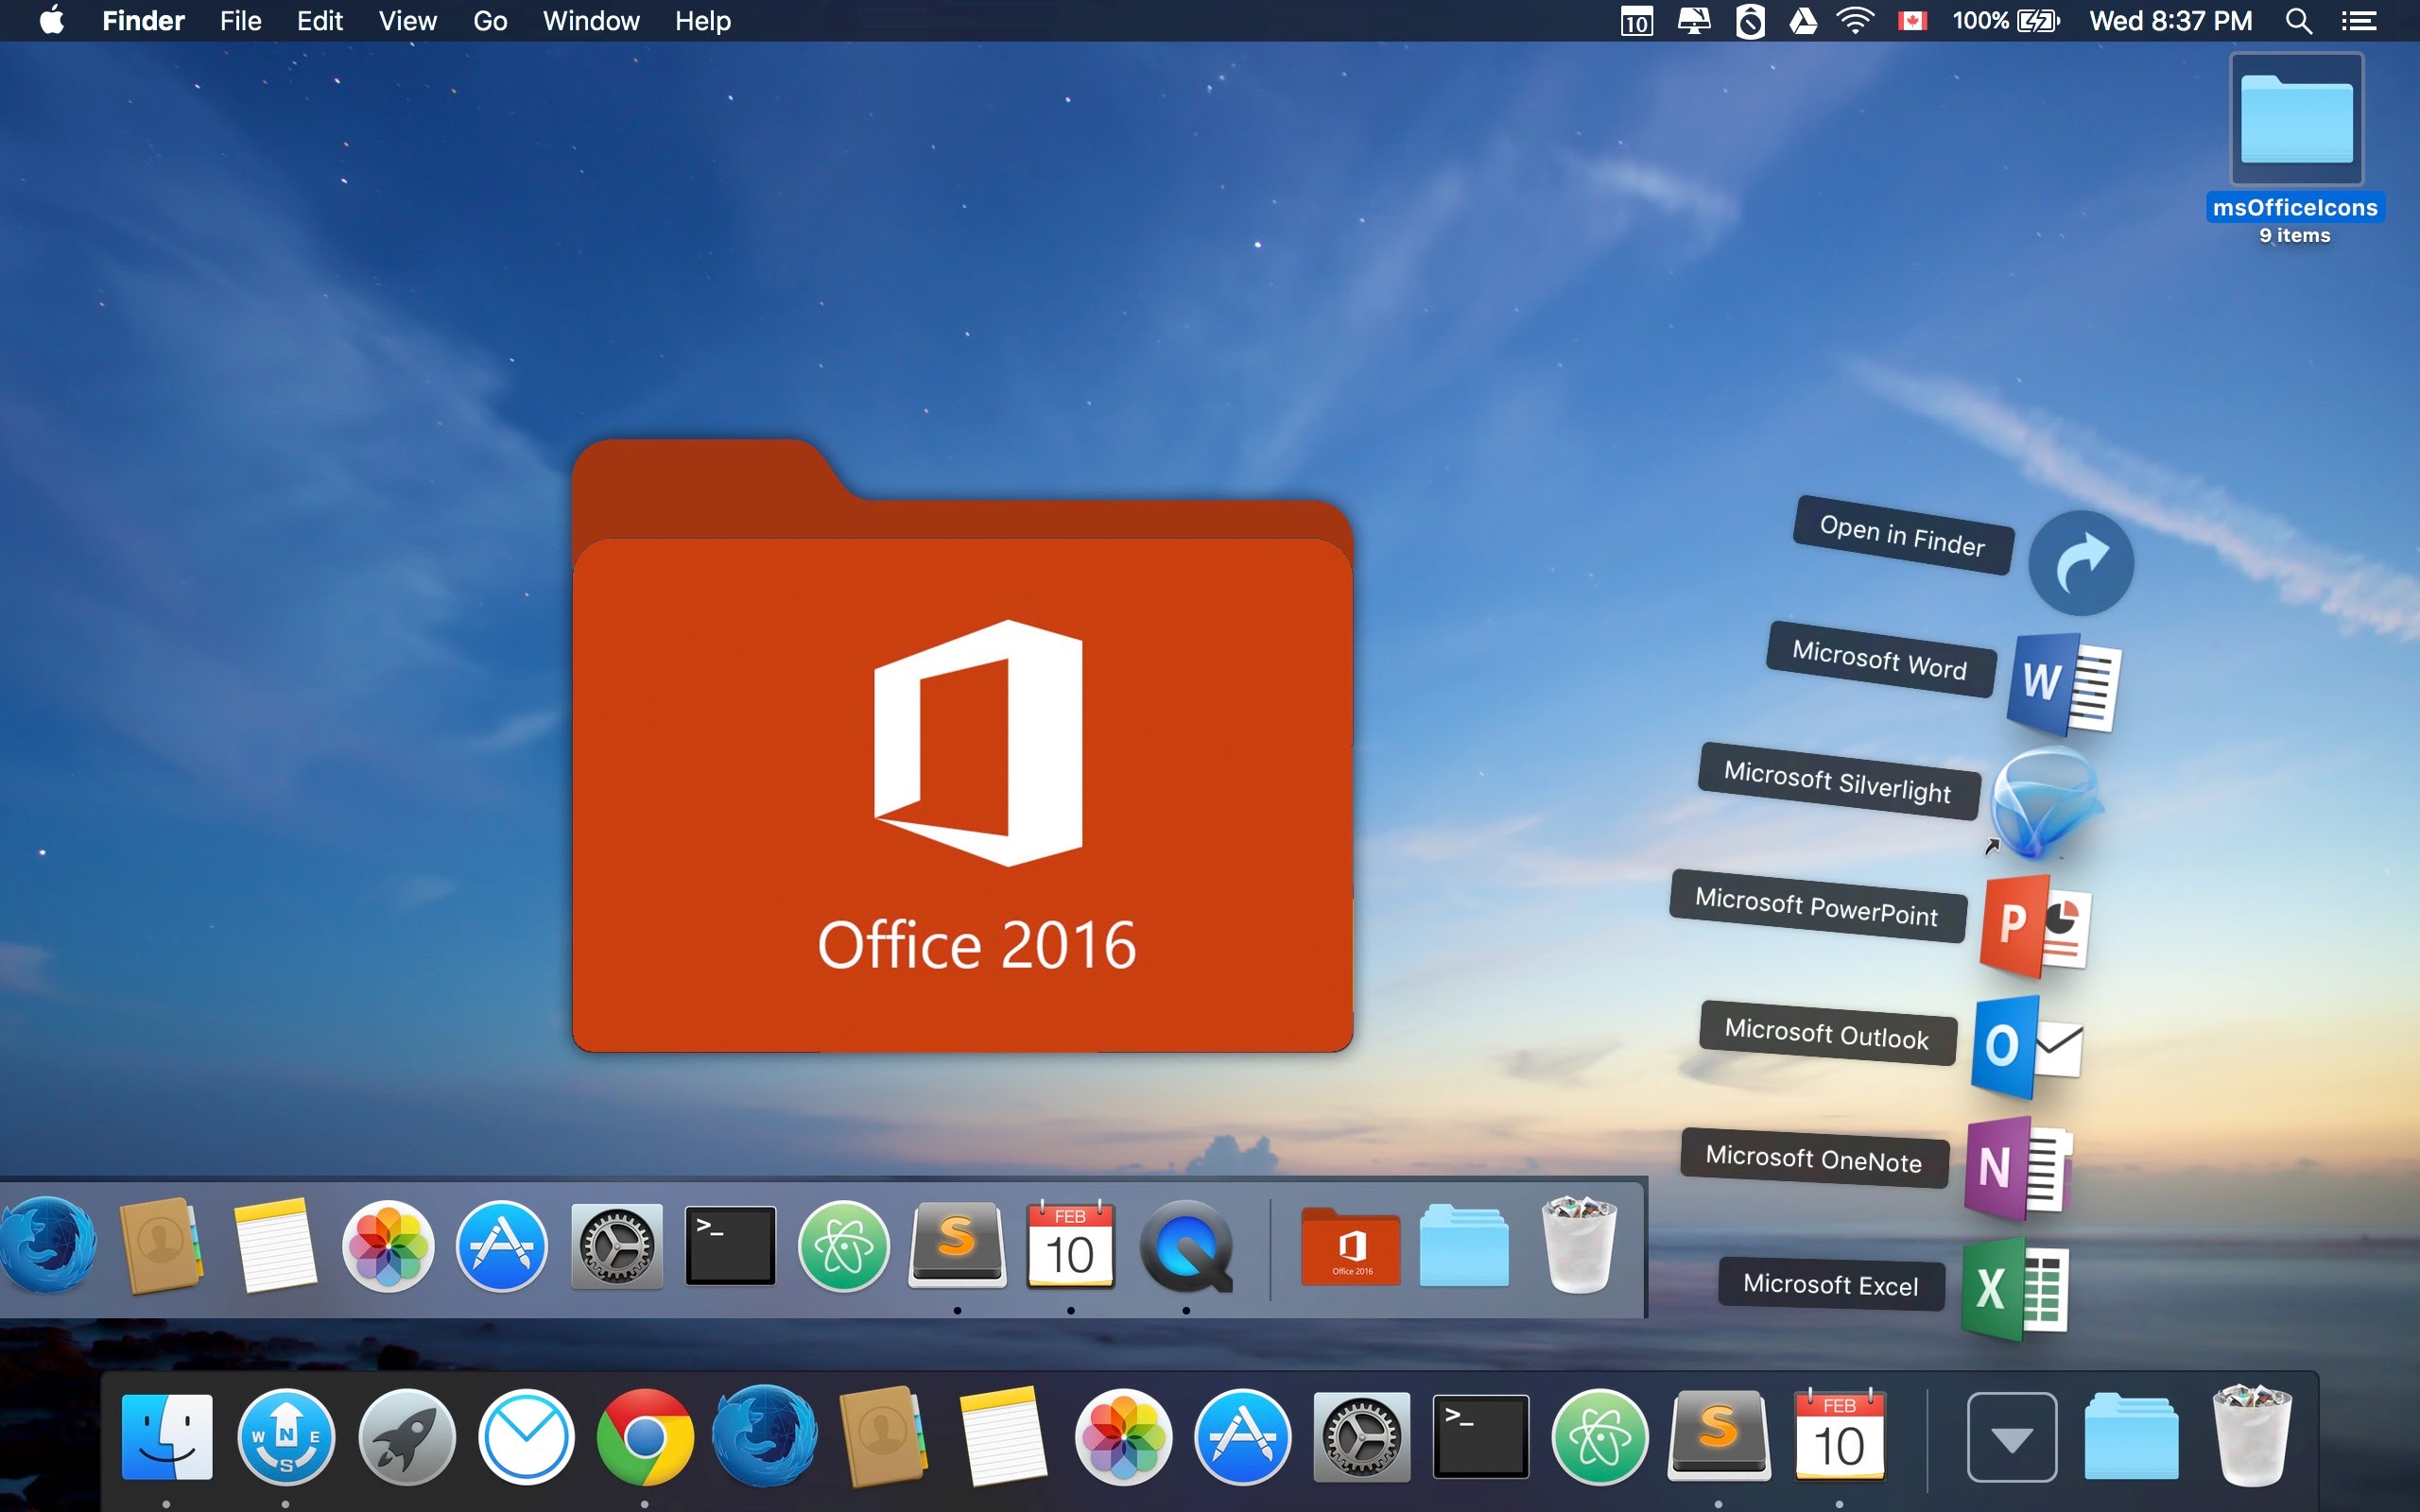 office 2016 for mac wpx